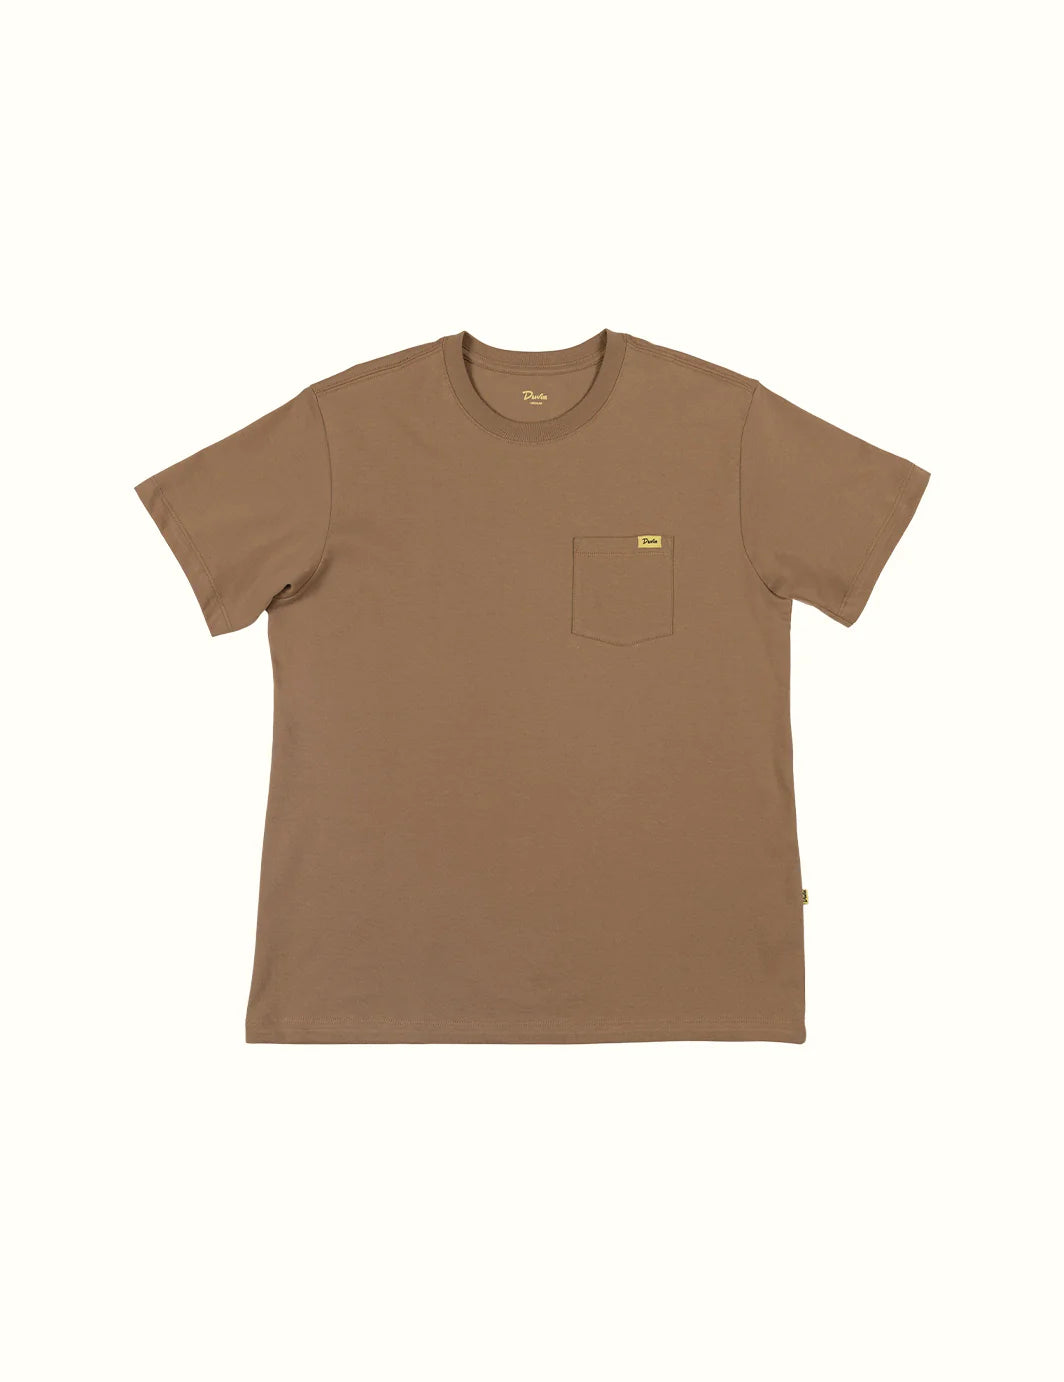 Duvin Pocket Tee Tan | Collective Request 